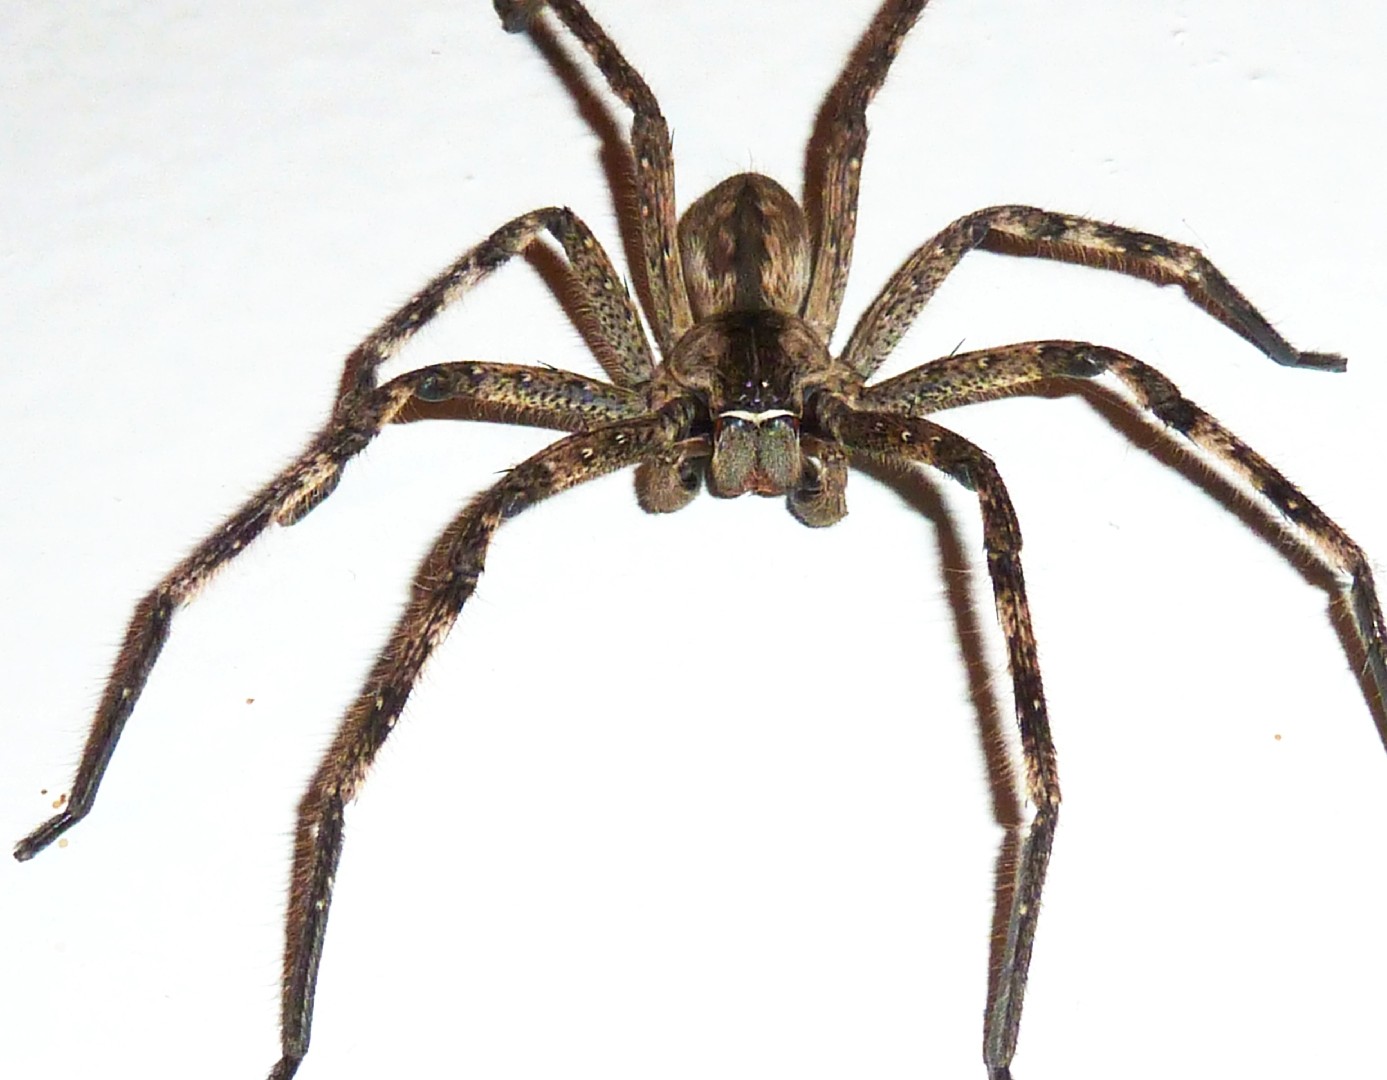 Common Spiders to Watch for In Colorado | Poisonous and Non-Venomous Species